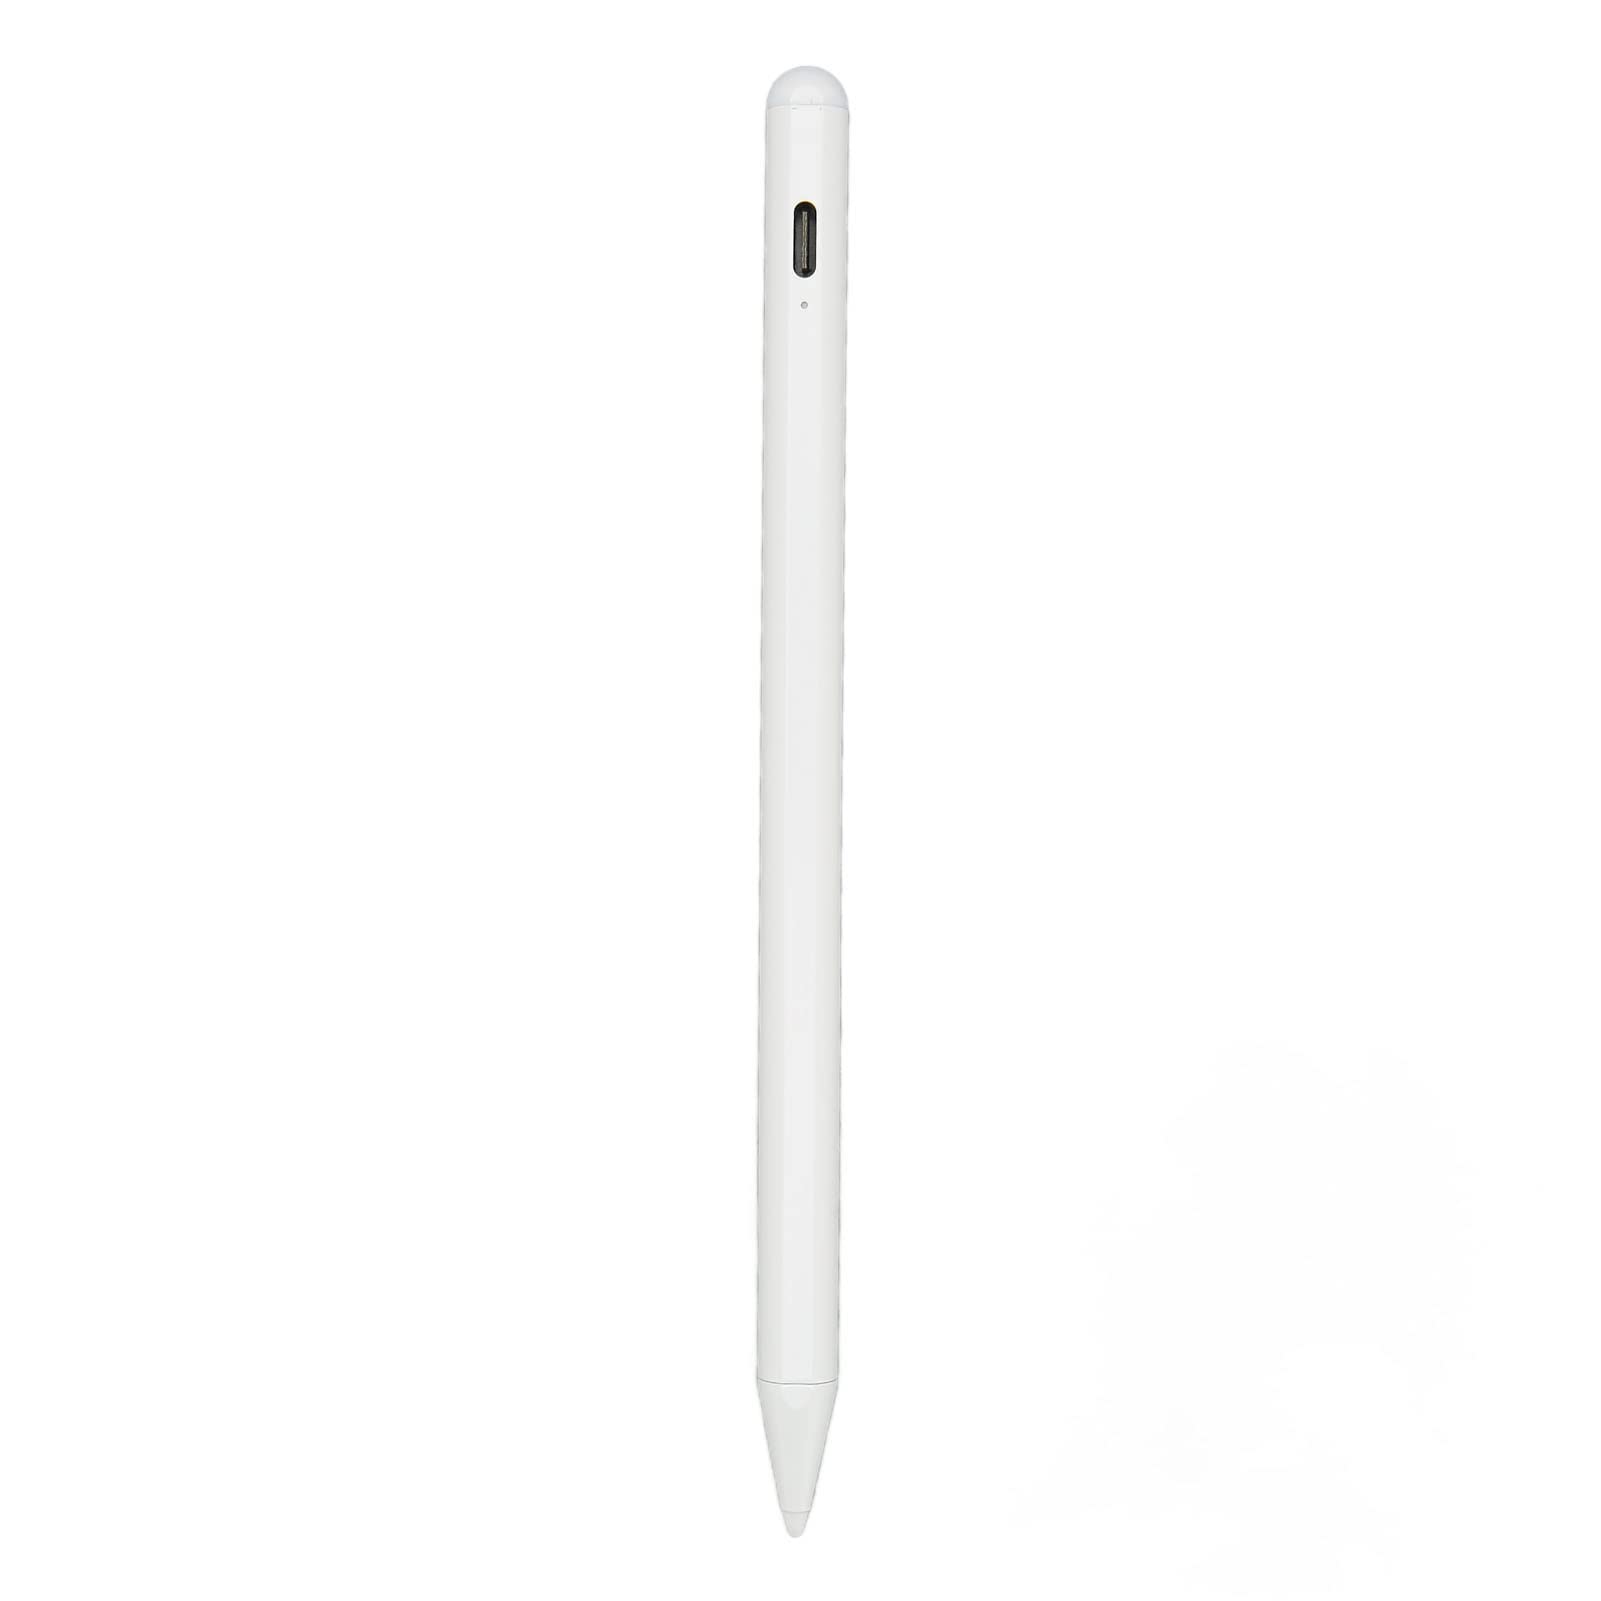 Tablet Stylus Pen, Glossy Writing Touch Screen Pen Palm Rejection High Accuracy for Student for Pro 9.7in 2016 (White)